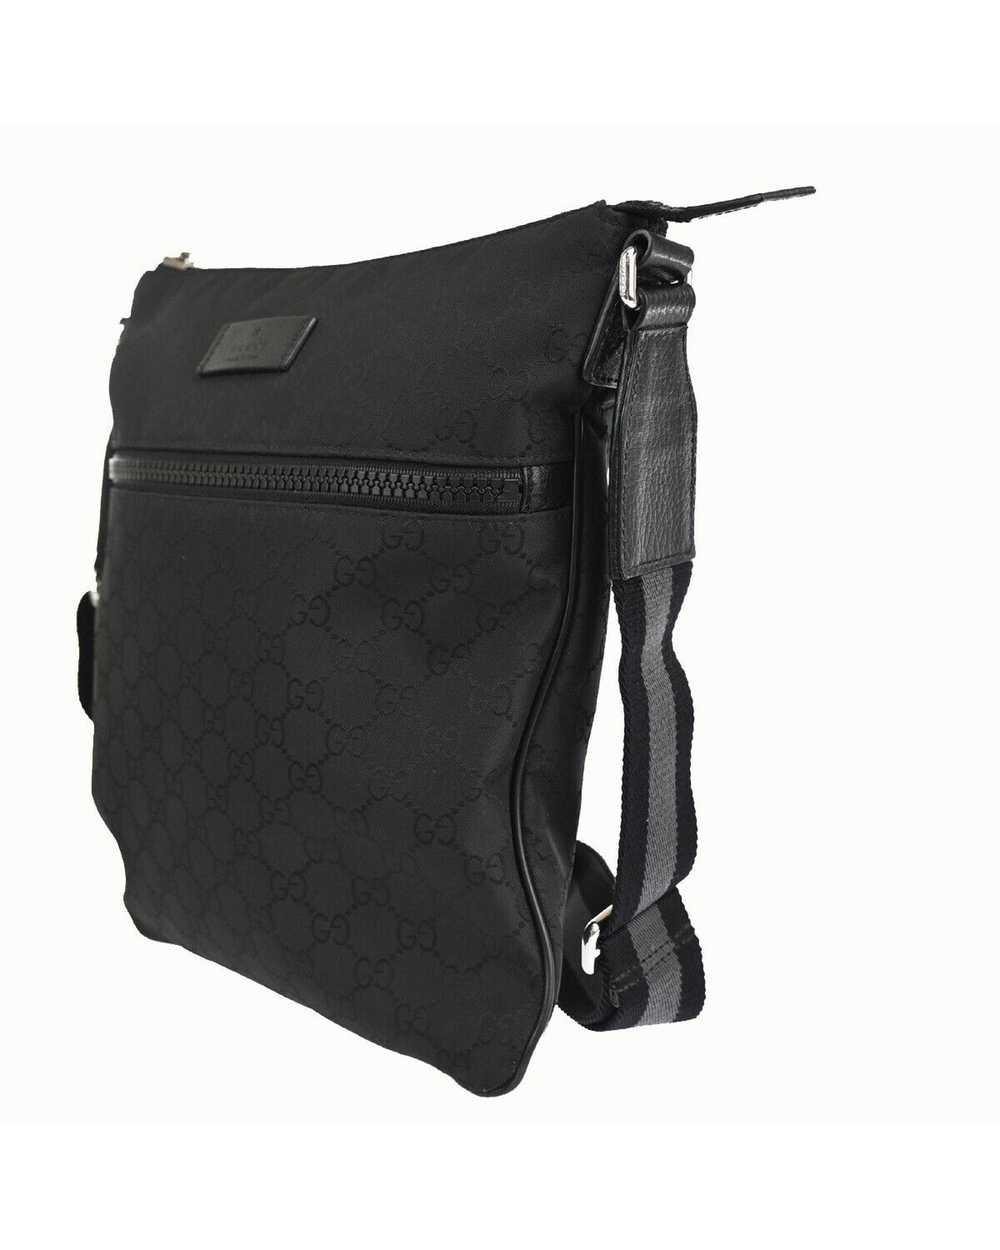 Gucci Luxury Black Synthetic Shoulder Bag by Gucci - image 2